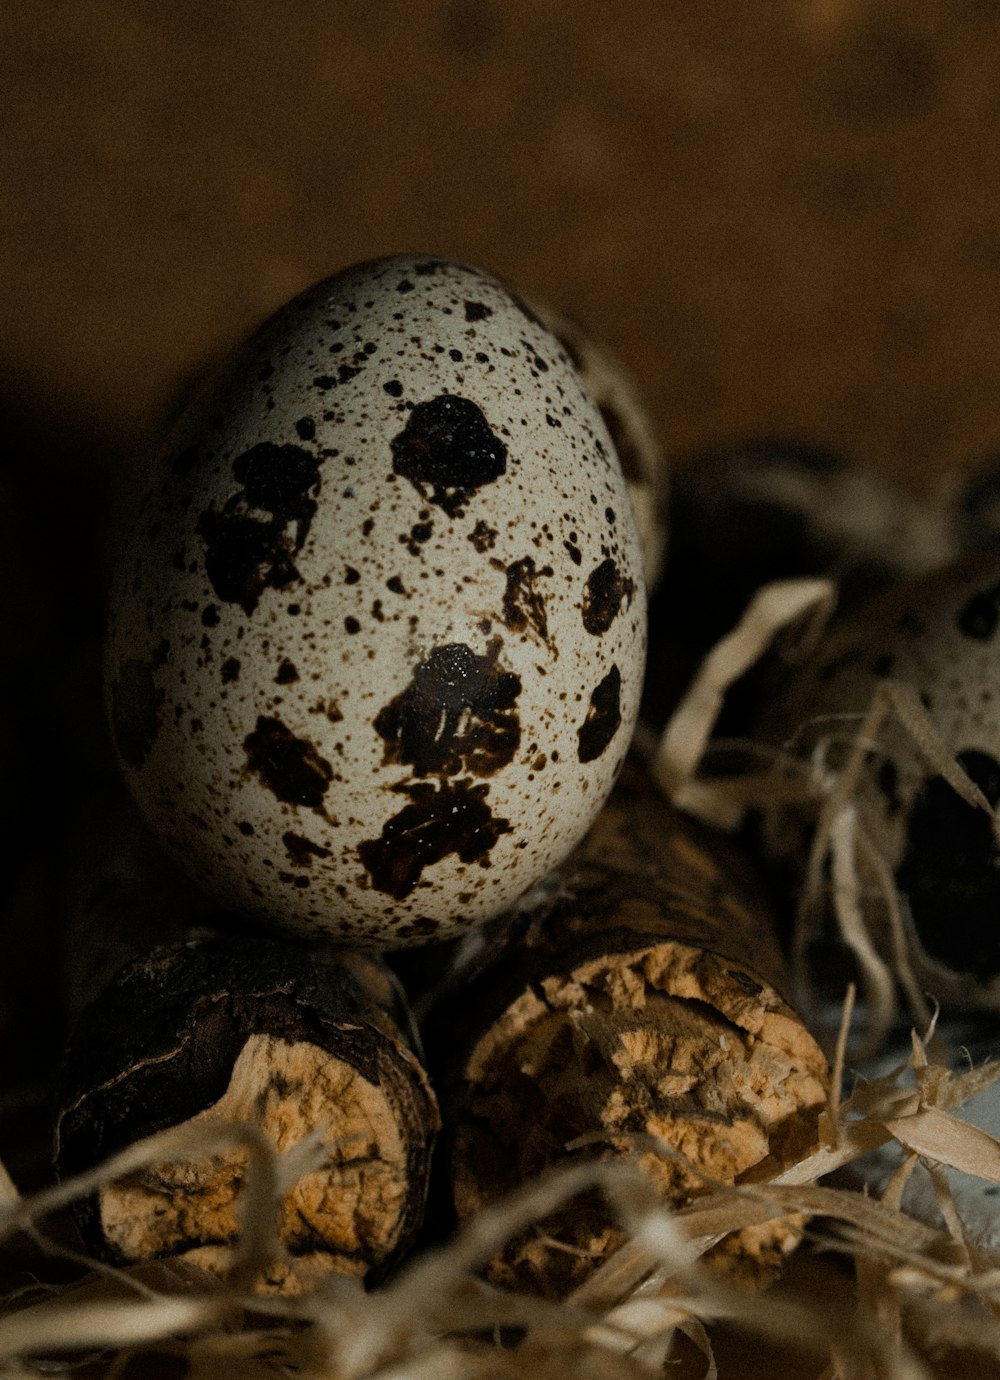 black and white egg on brown dried leaves